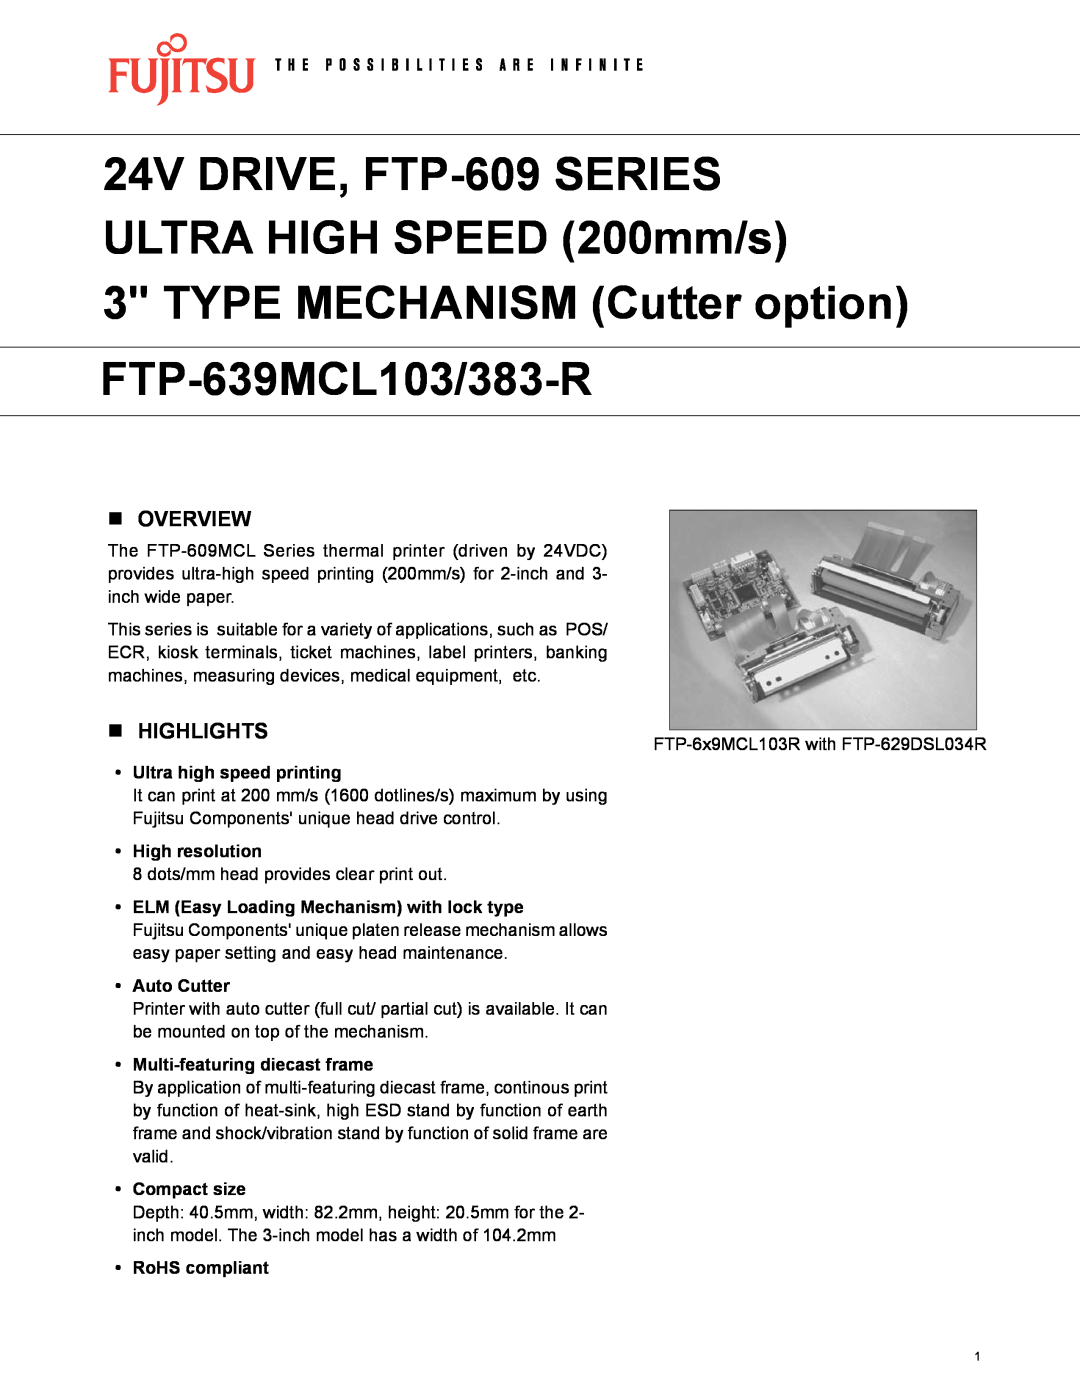 Fujitsu FTP-639MCL103/383-R manual n Overview, n HIGHLIGHTS, Ultra high speed printing, High resolution, Auto Cutter 